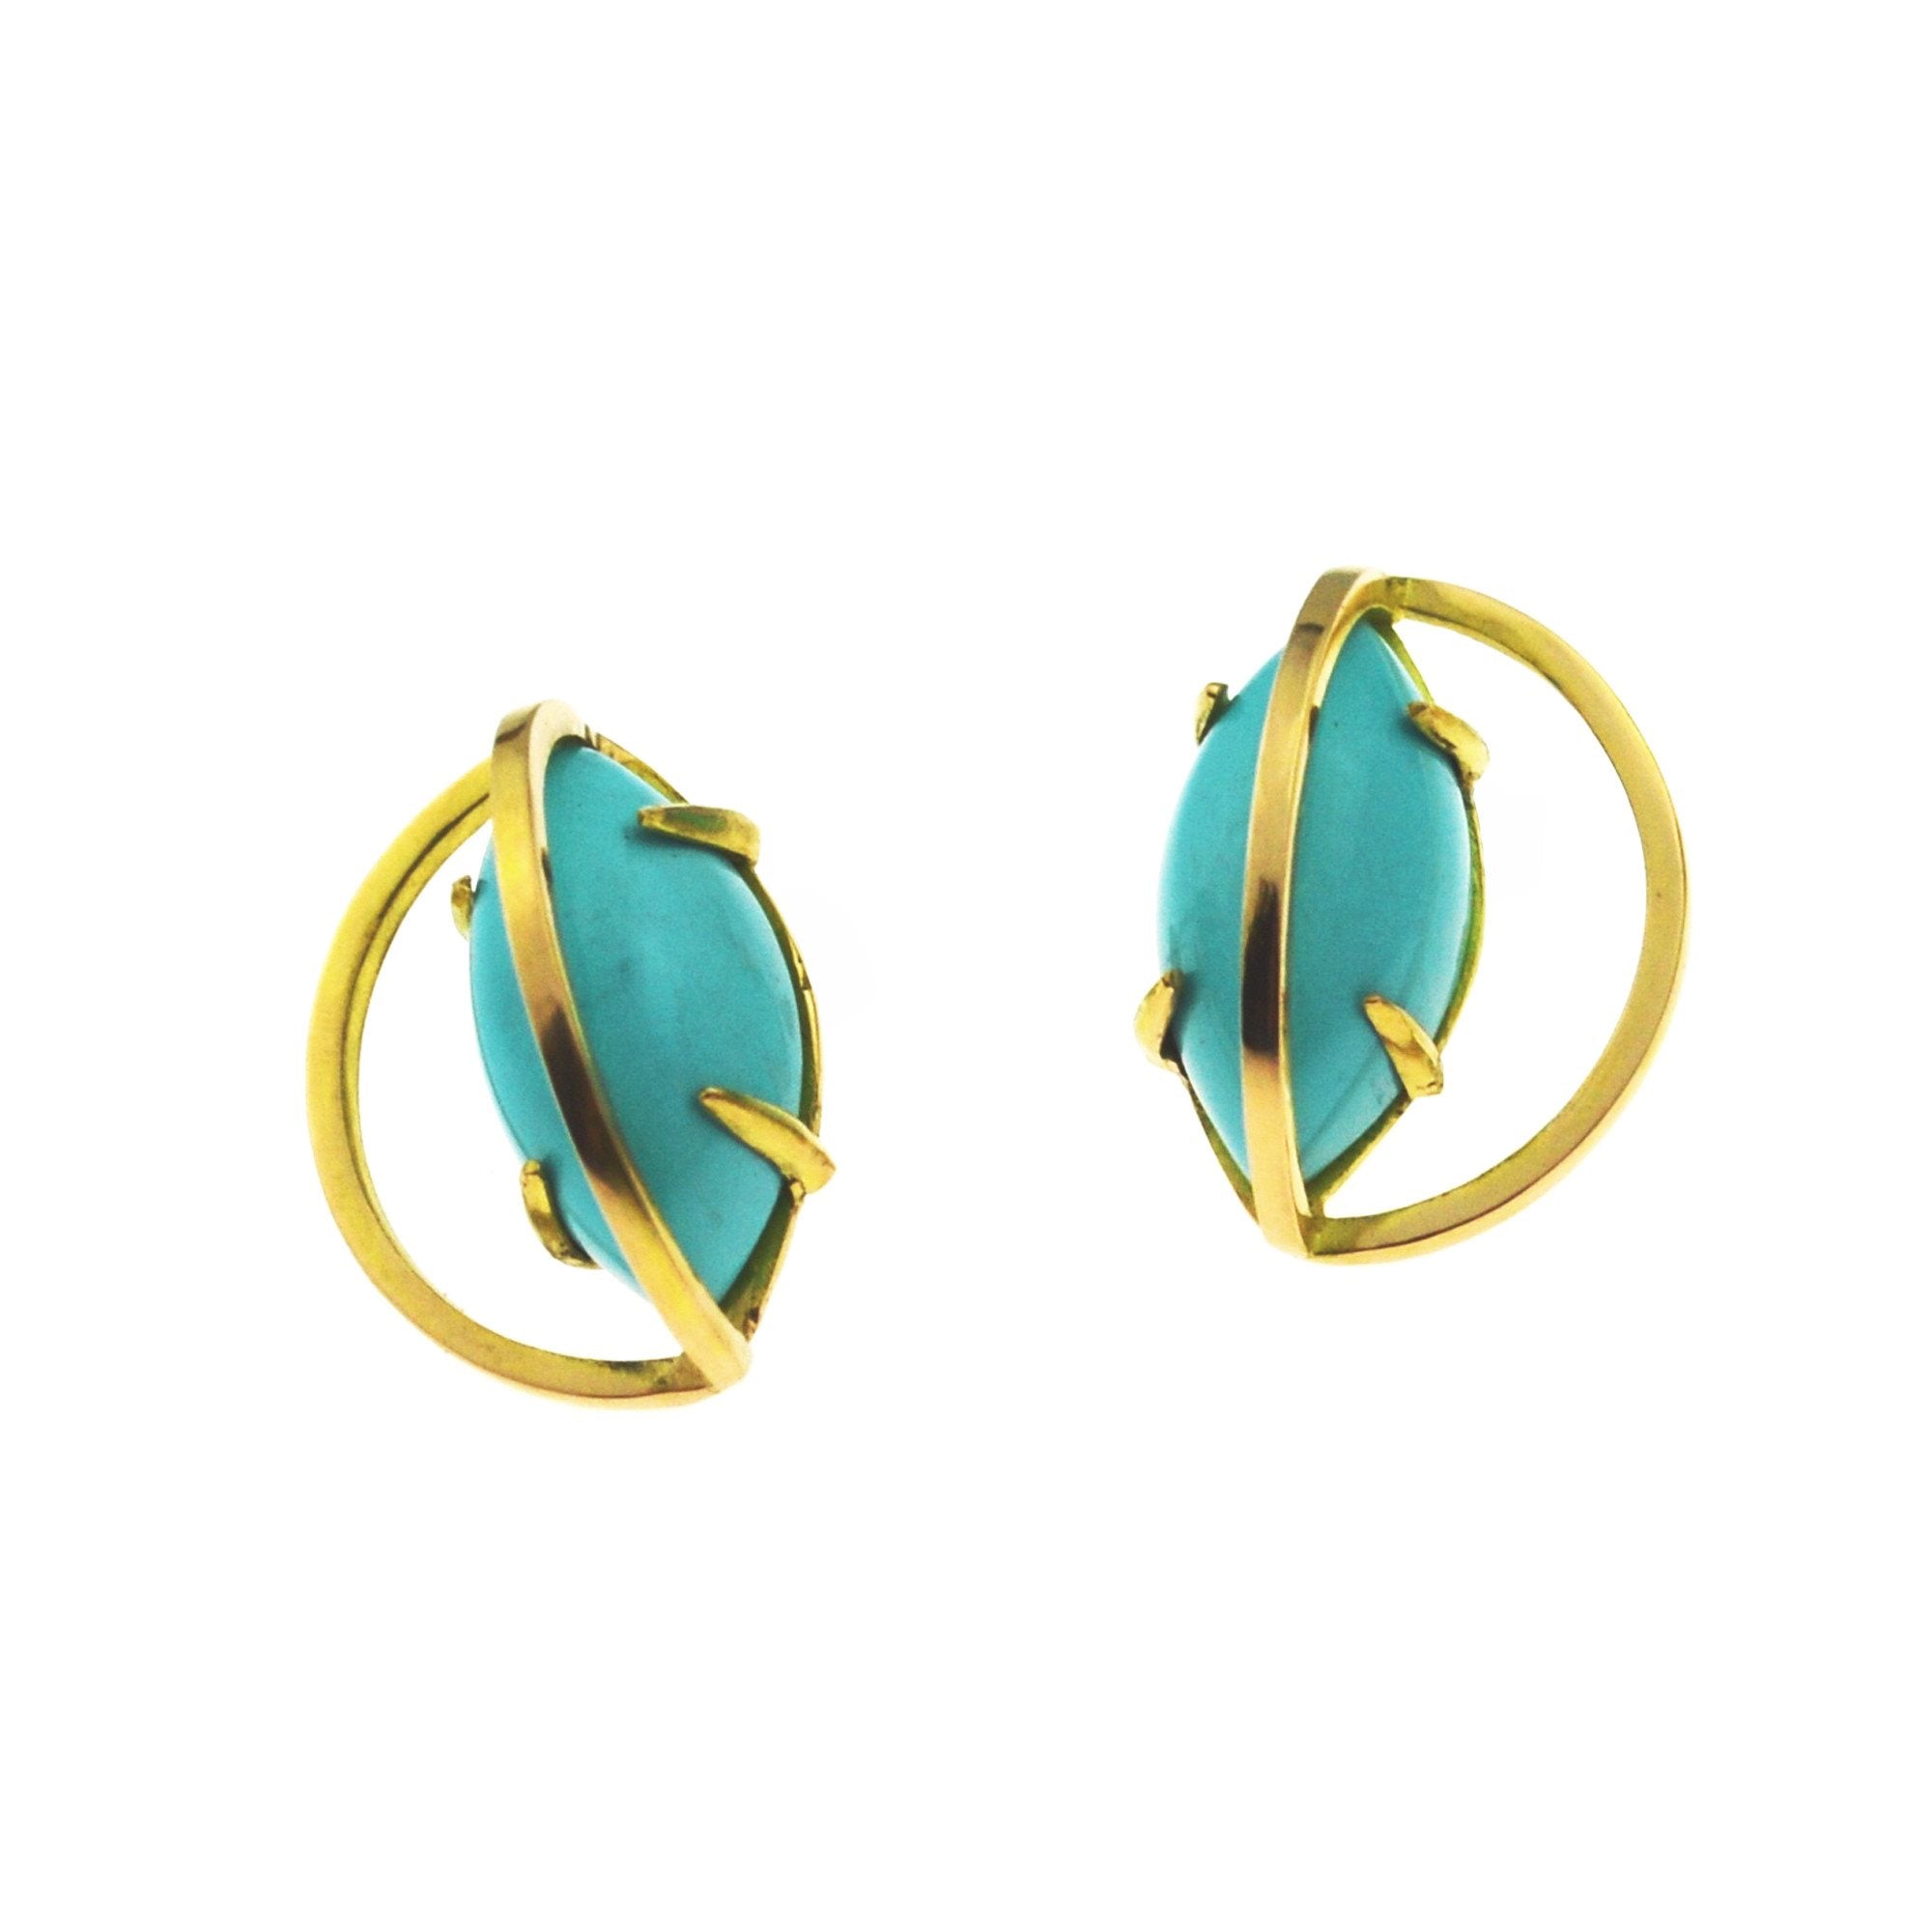 Slip Stream Earring Stud in 18k gold with natural Persian Turquoise ...